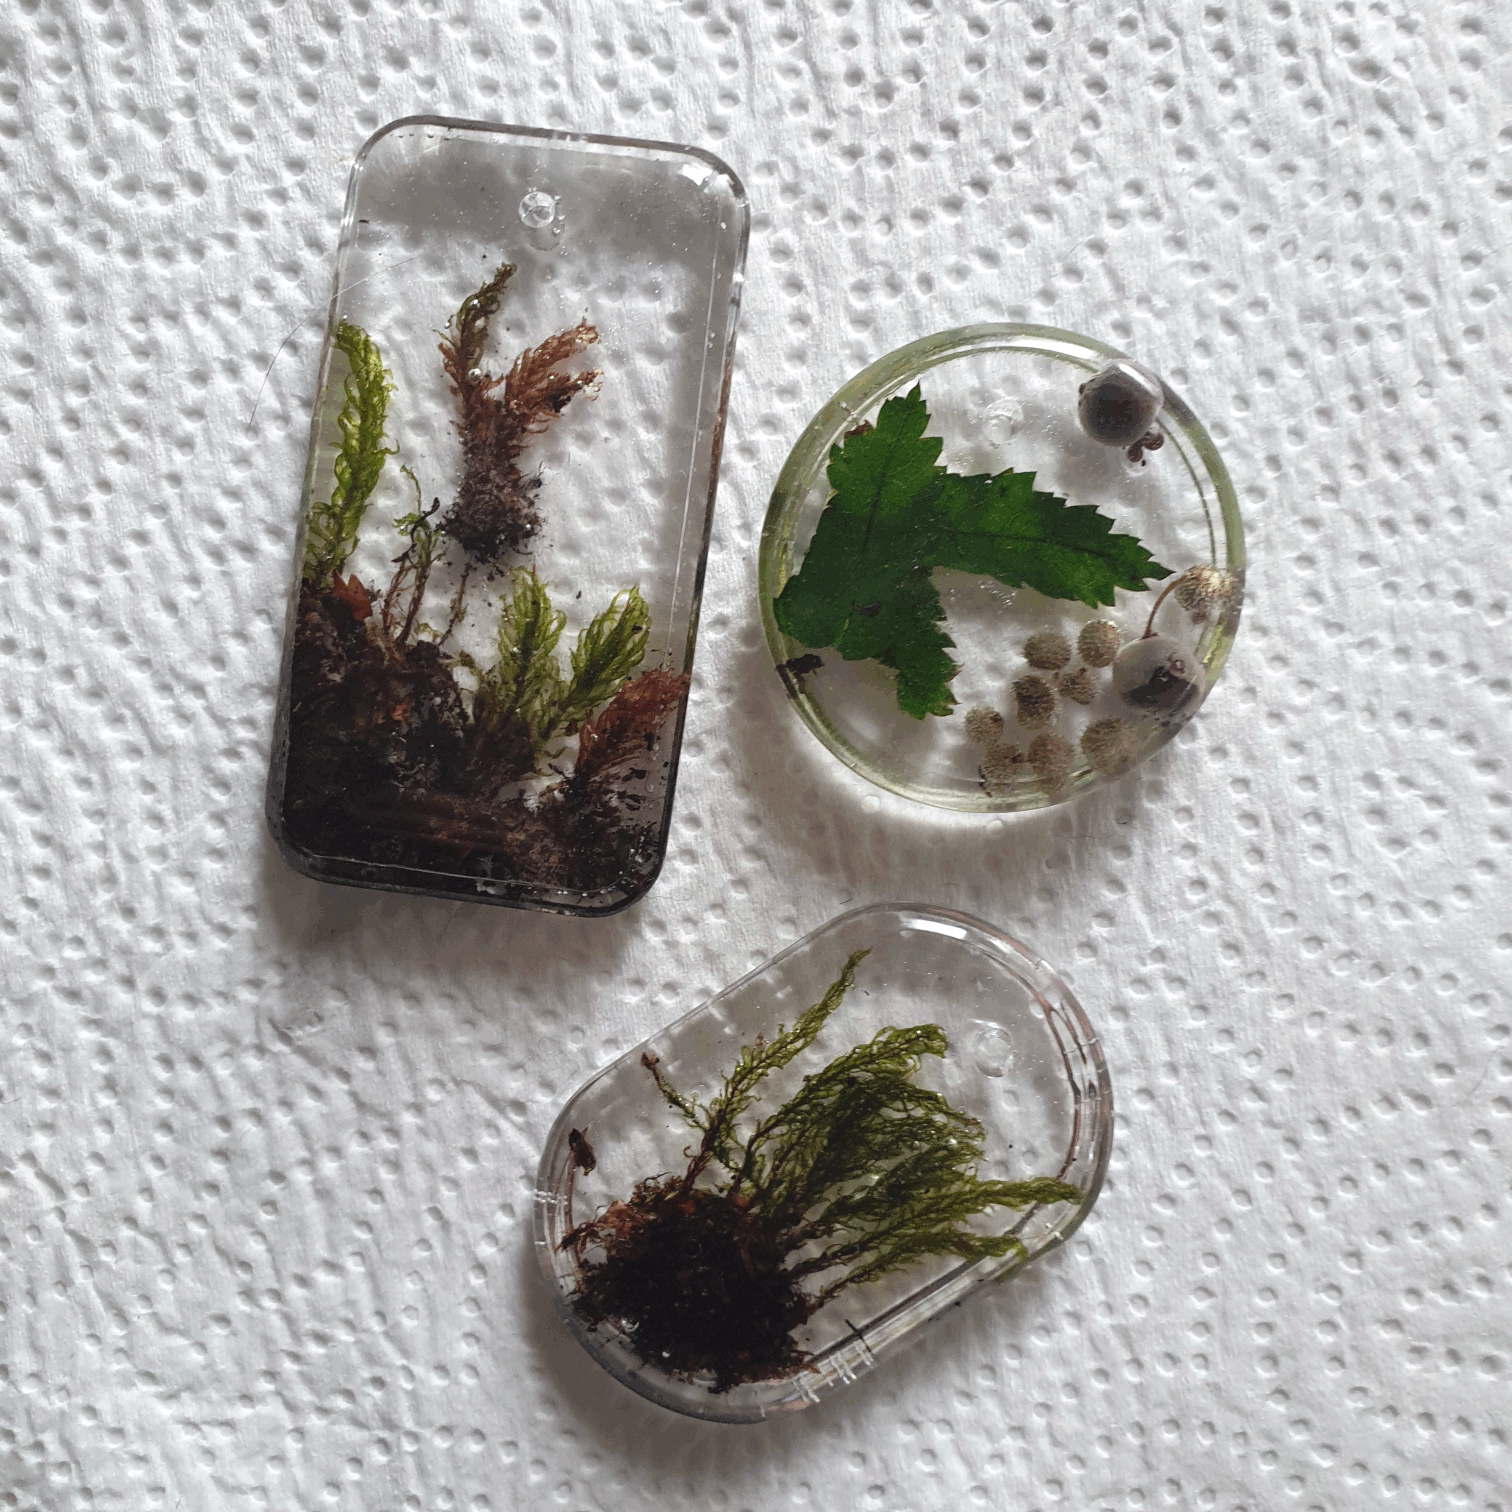 3 clear resin keychains with moss and plants inside them